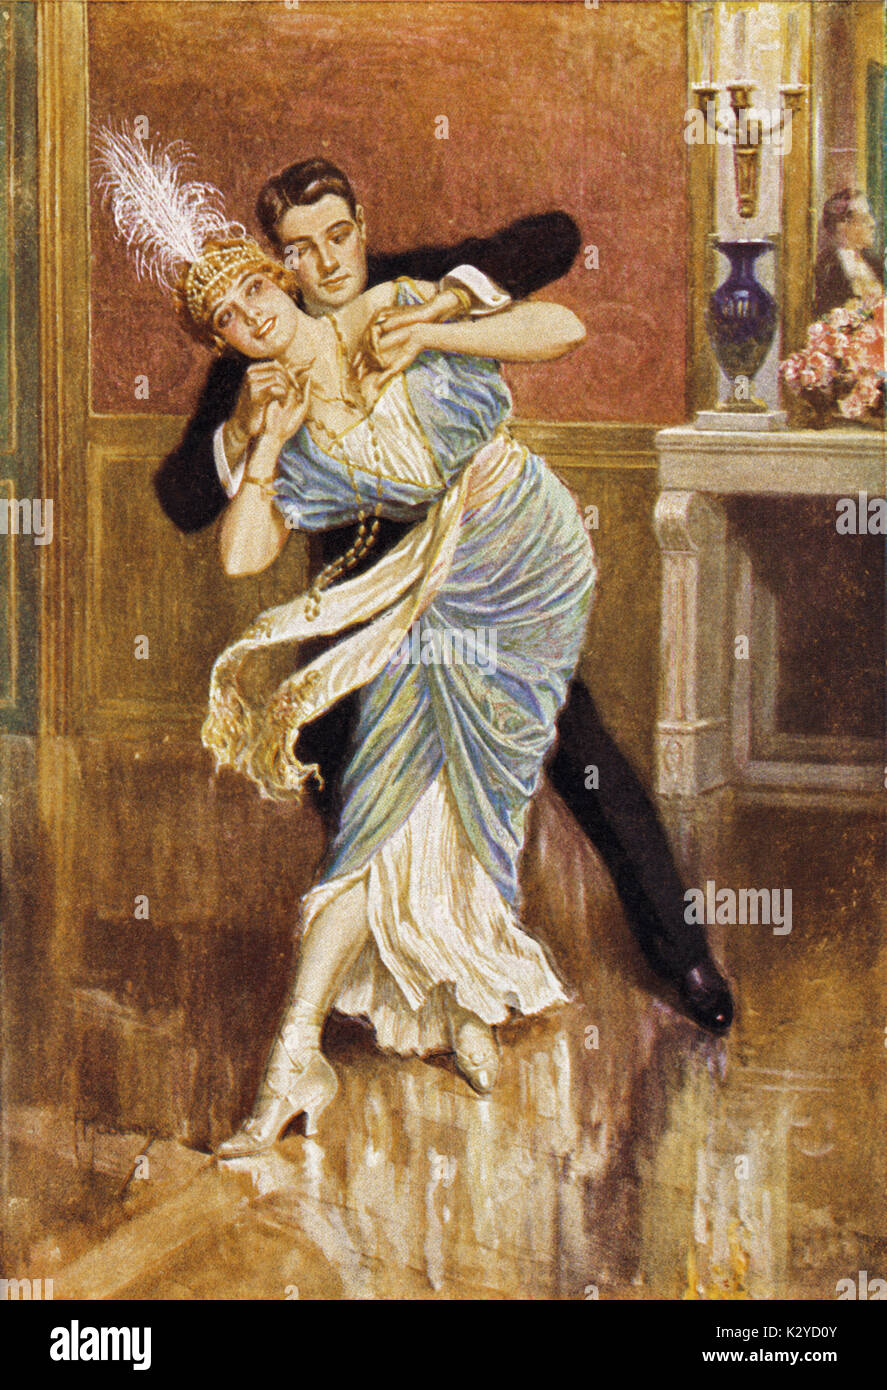 DANCE - AUSTRIA - EARLY 20THC - VIENNA entitled 'Once upon a time' Stock Photo